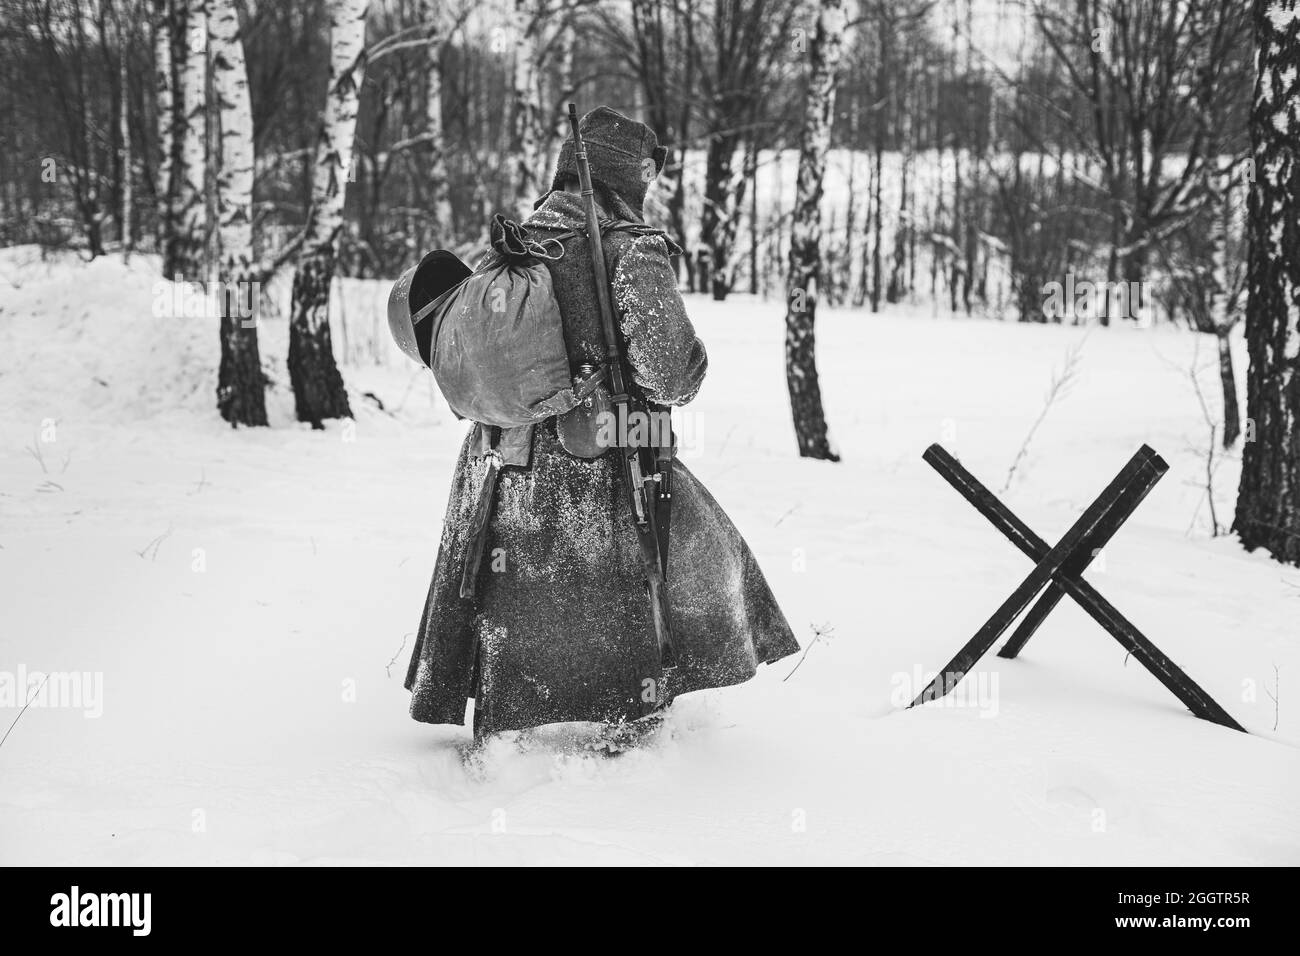 World War II Russian Soviet Red Army Soldier Marching Through Snowy Winter Forest Forest. Soldier Of WWII WW2 Times. Black And White Photo. Stock Photo